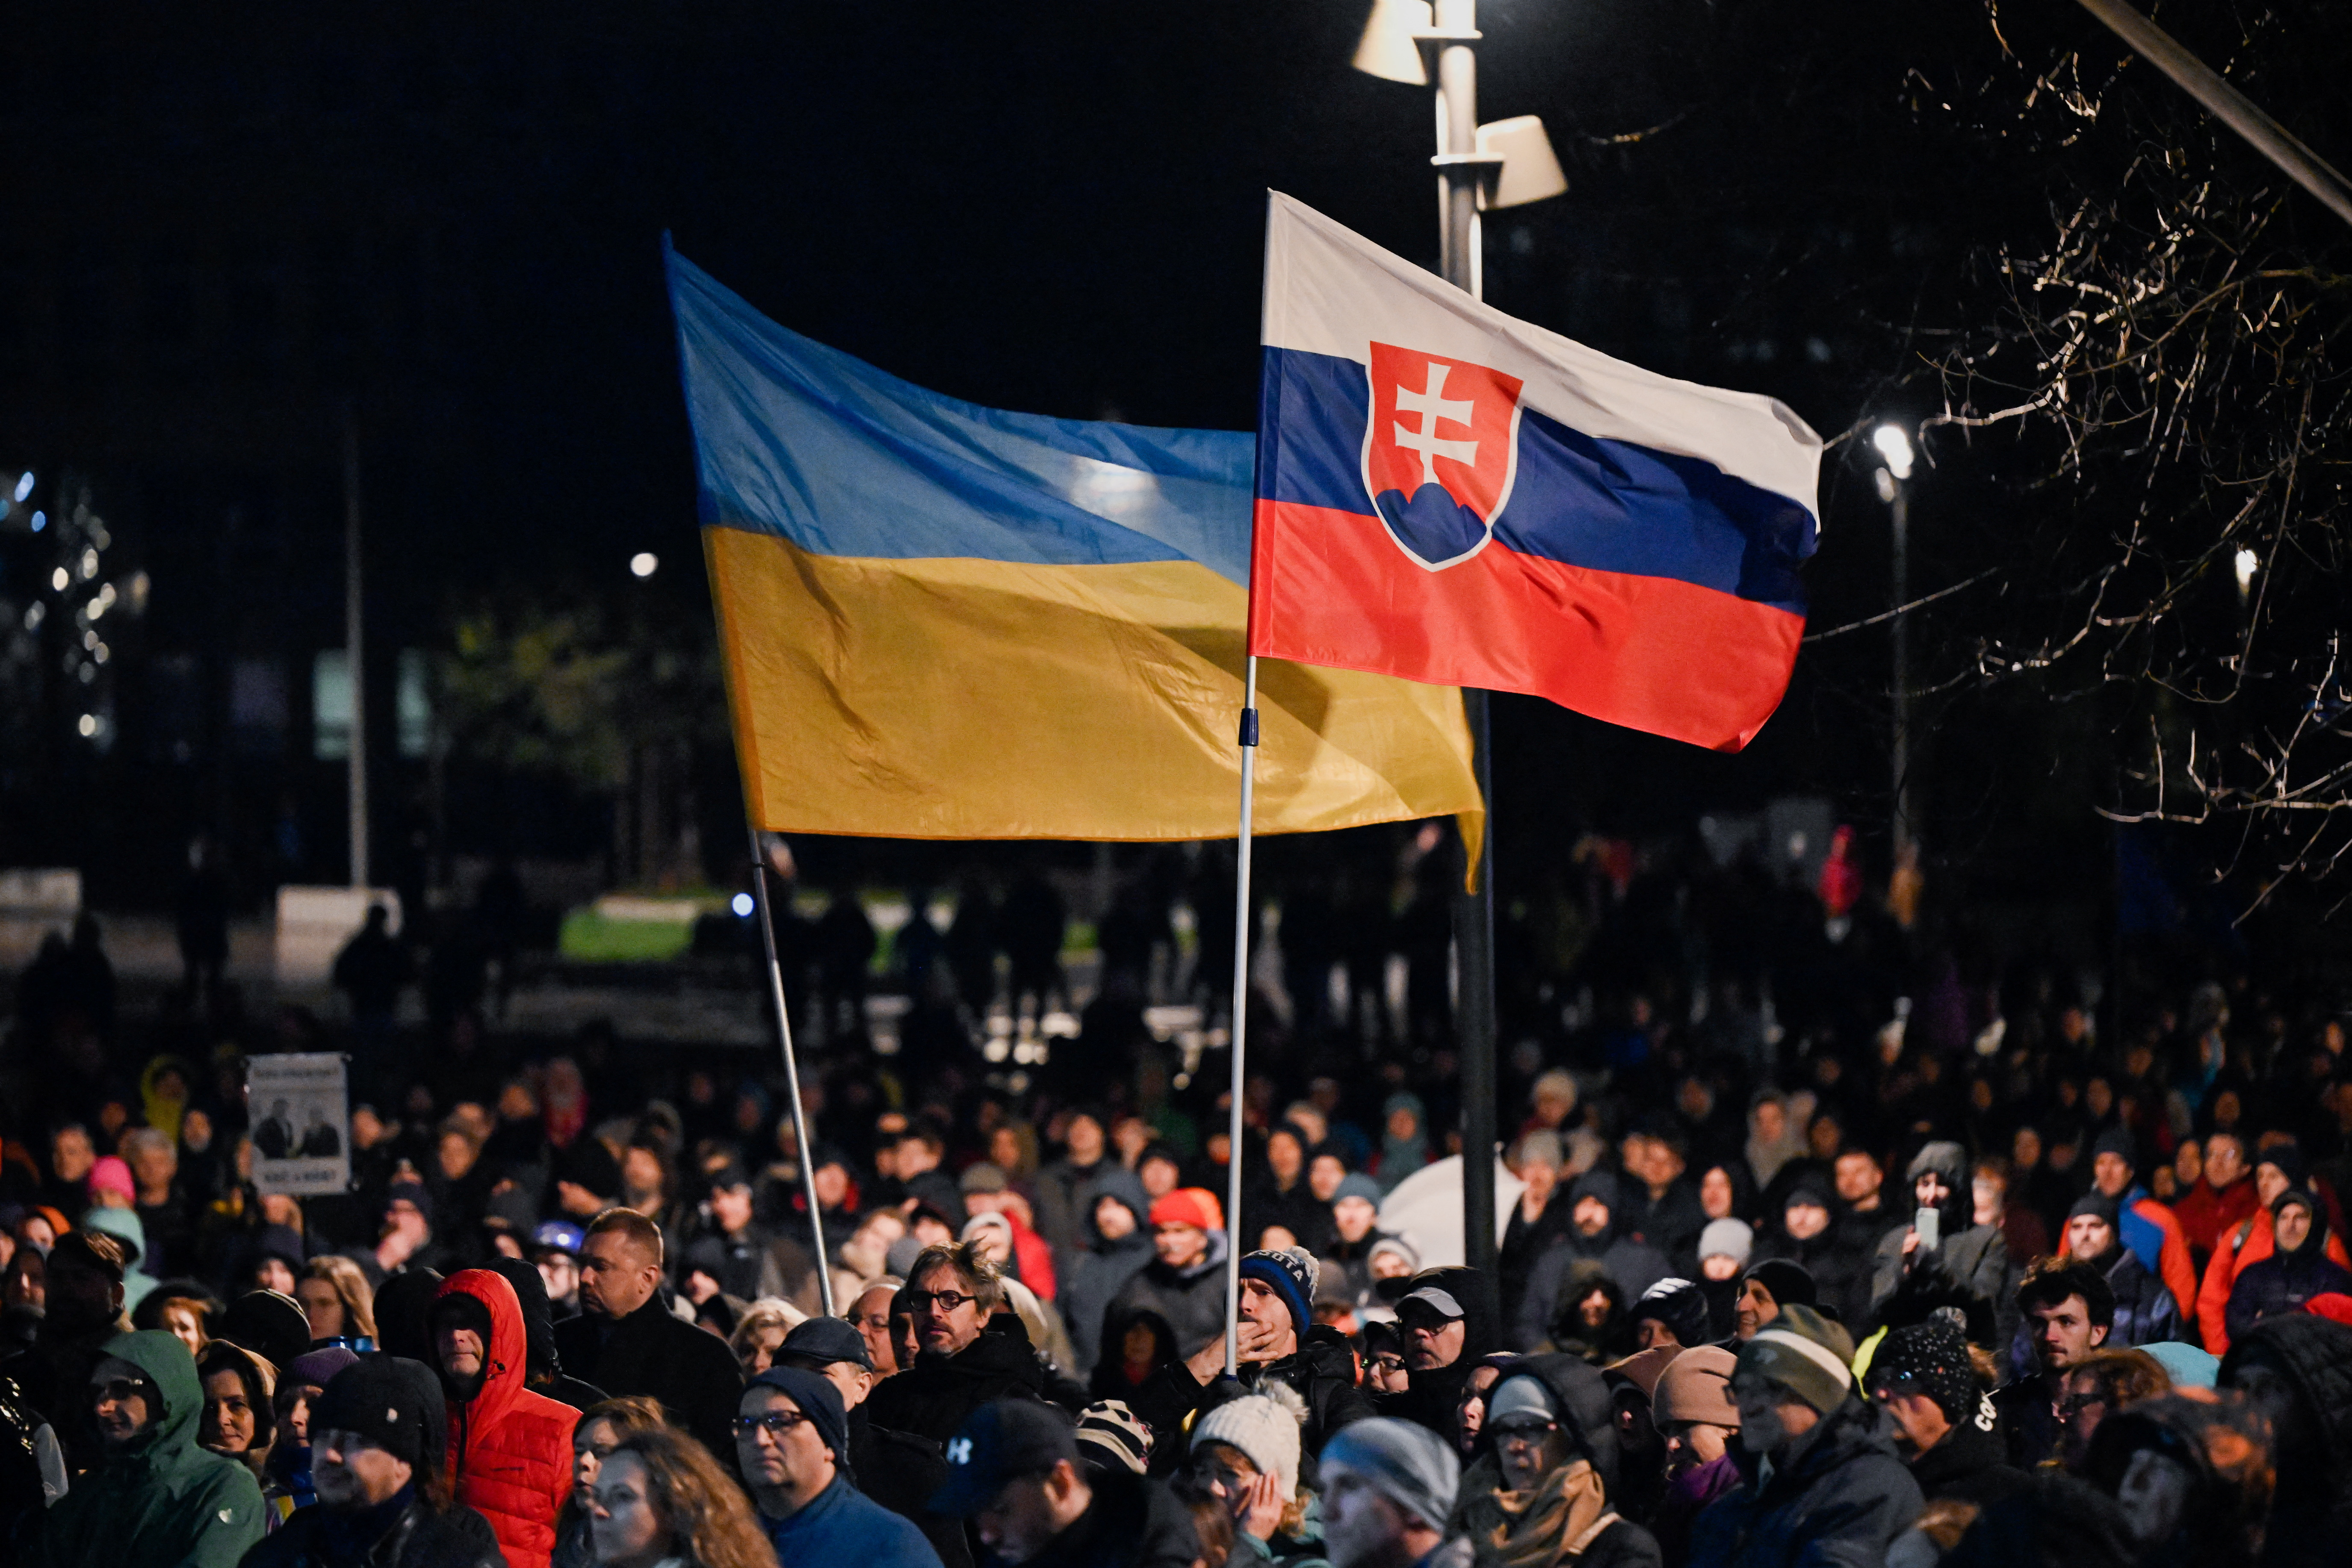 Pro-Ukraine protest against the Slovak government's foreign policy in Bratislava